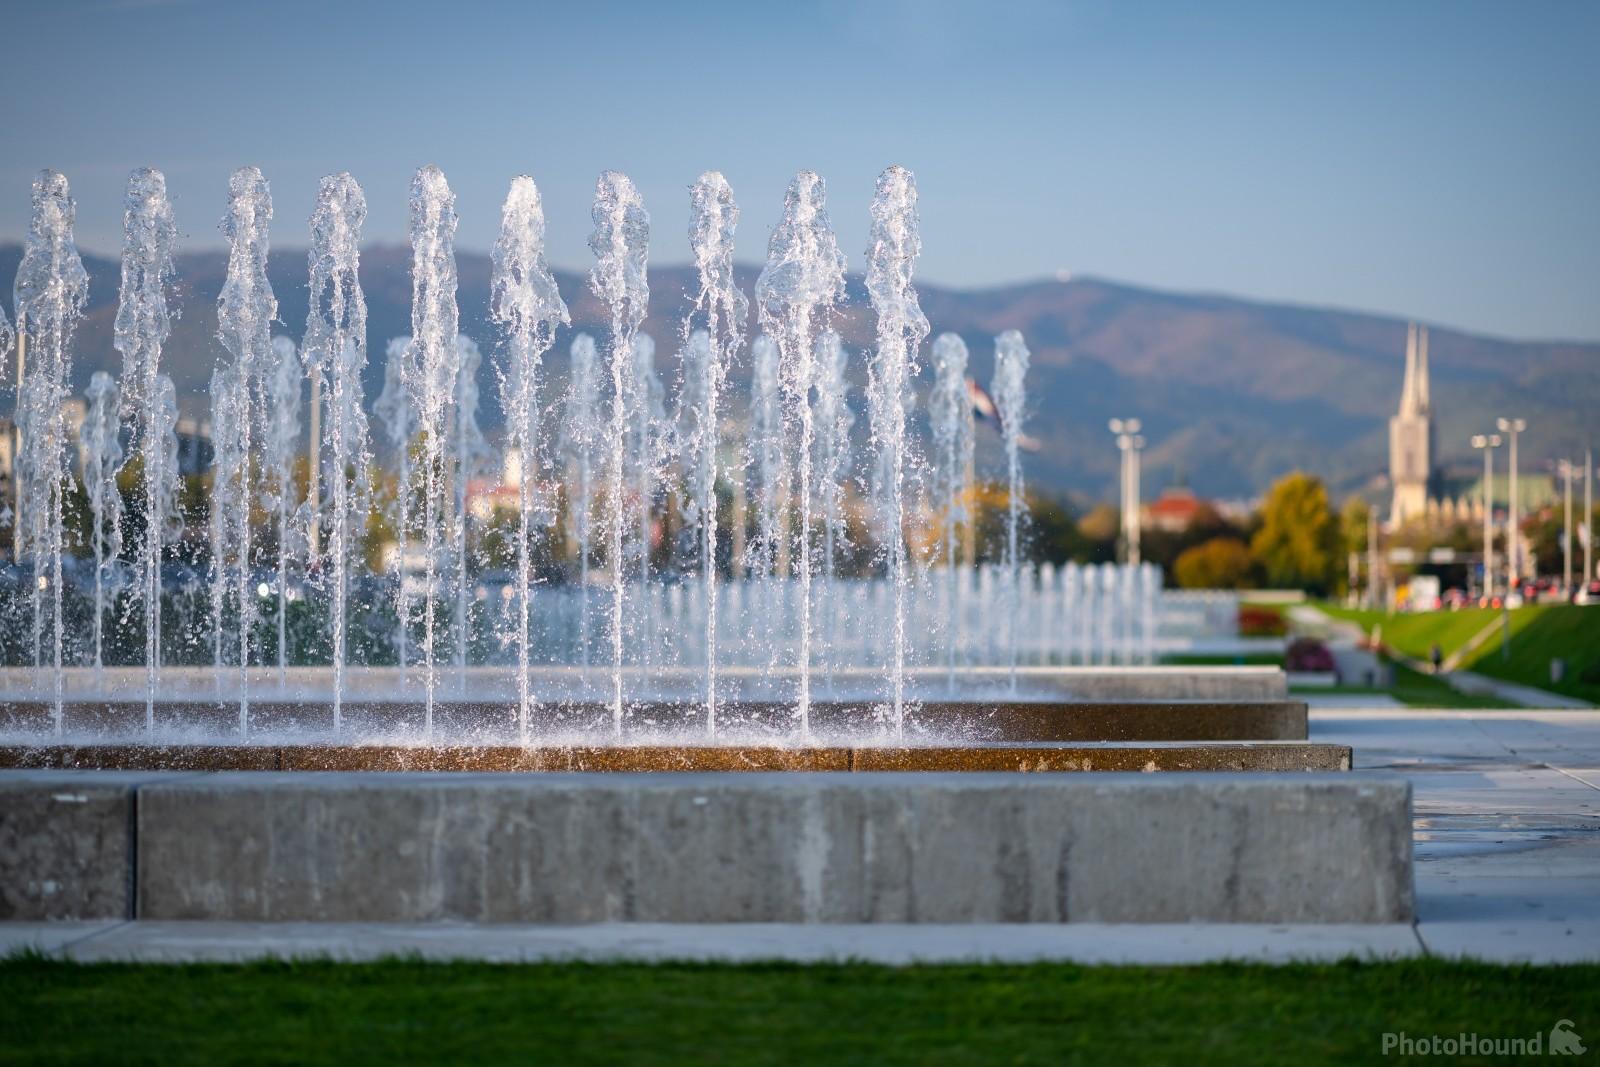 Image of Zagreb fountains at University Park by VOJTa Herout